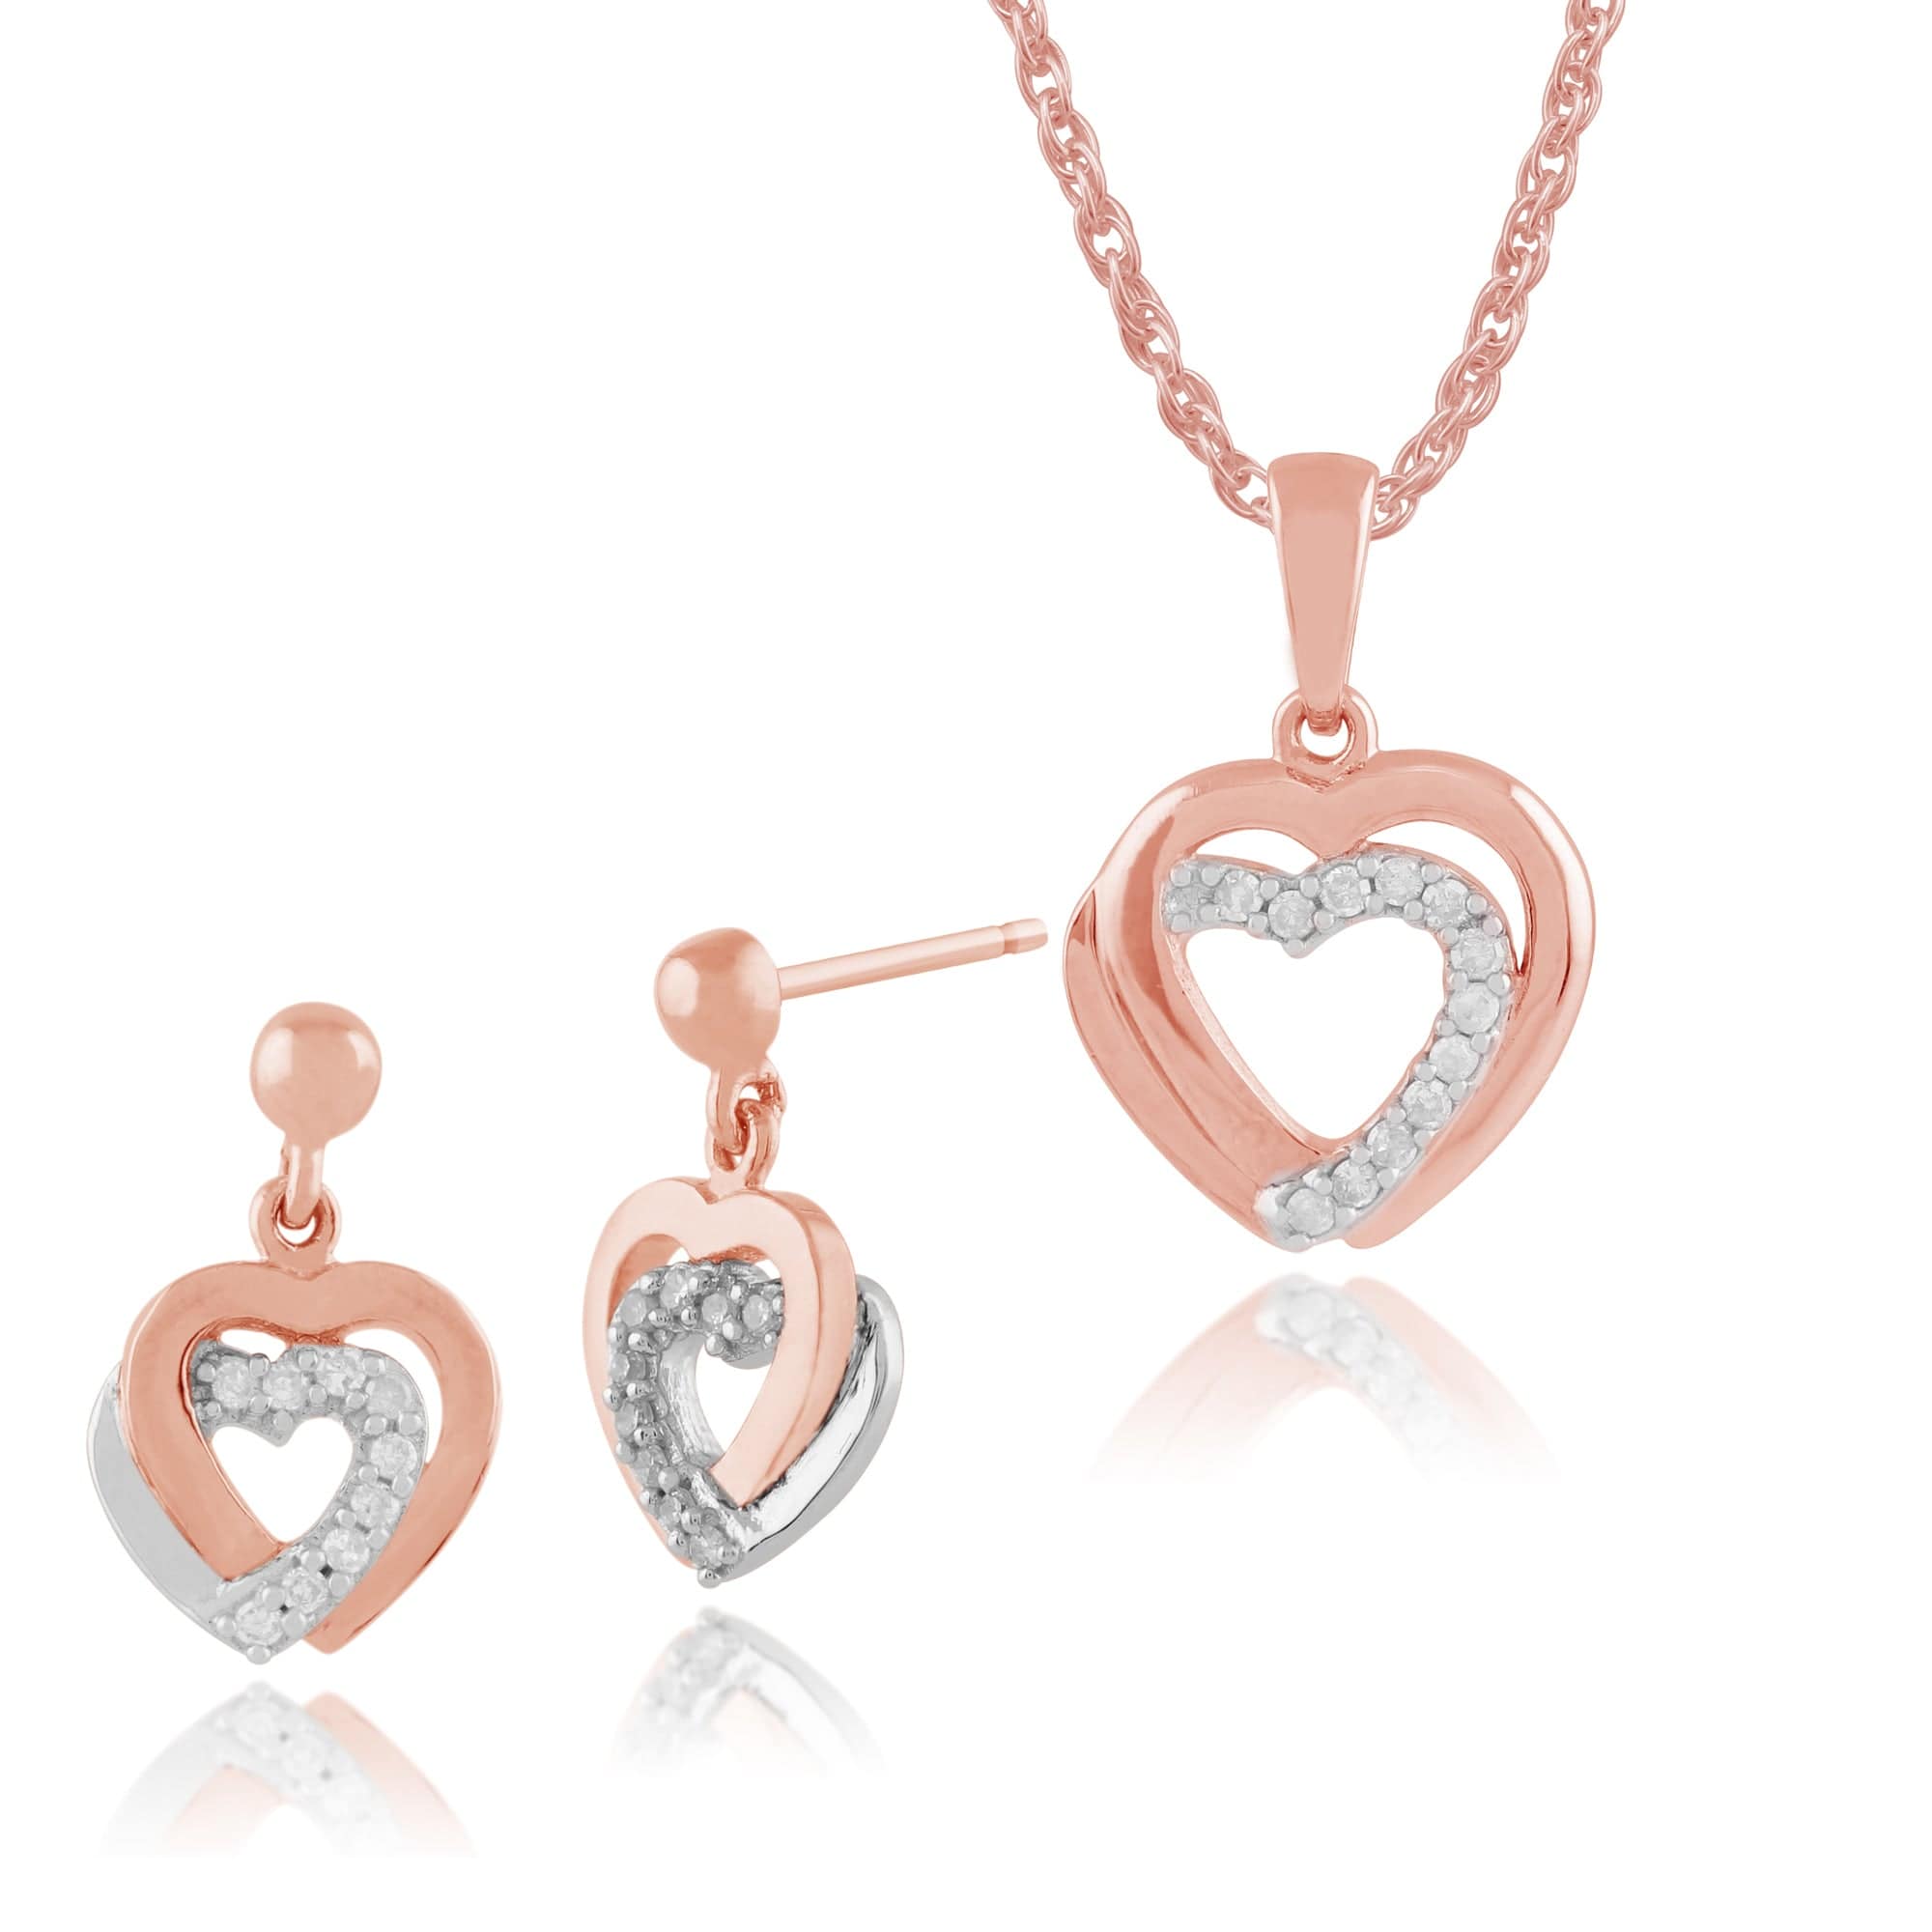 191E0357019-191P0698019 Classic Round Diamond Double Heart Drop Earrings & Pendant Set in 9ct Rose Gold 1